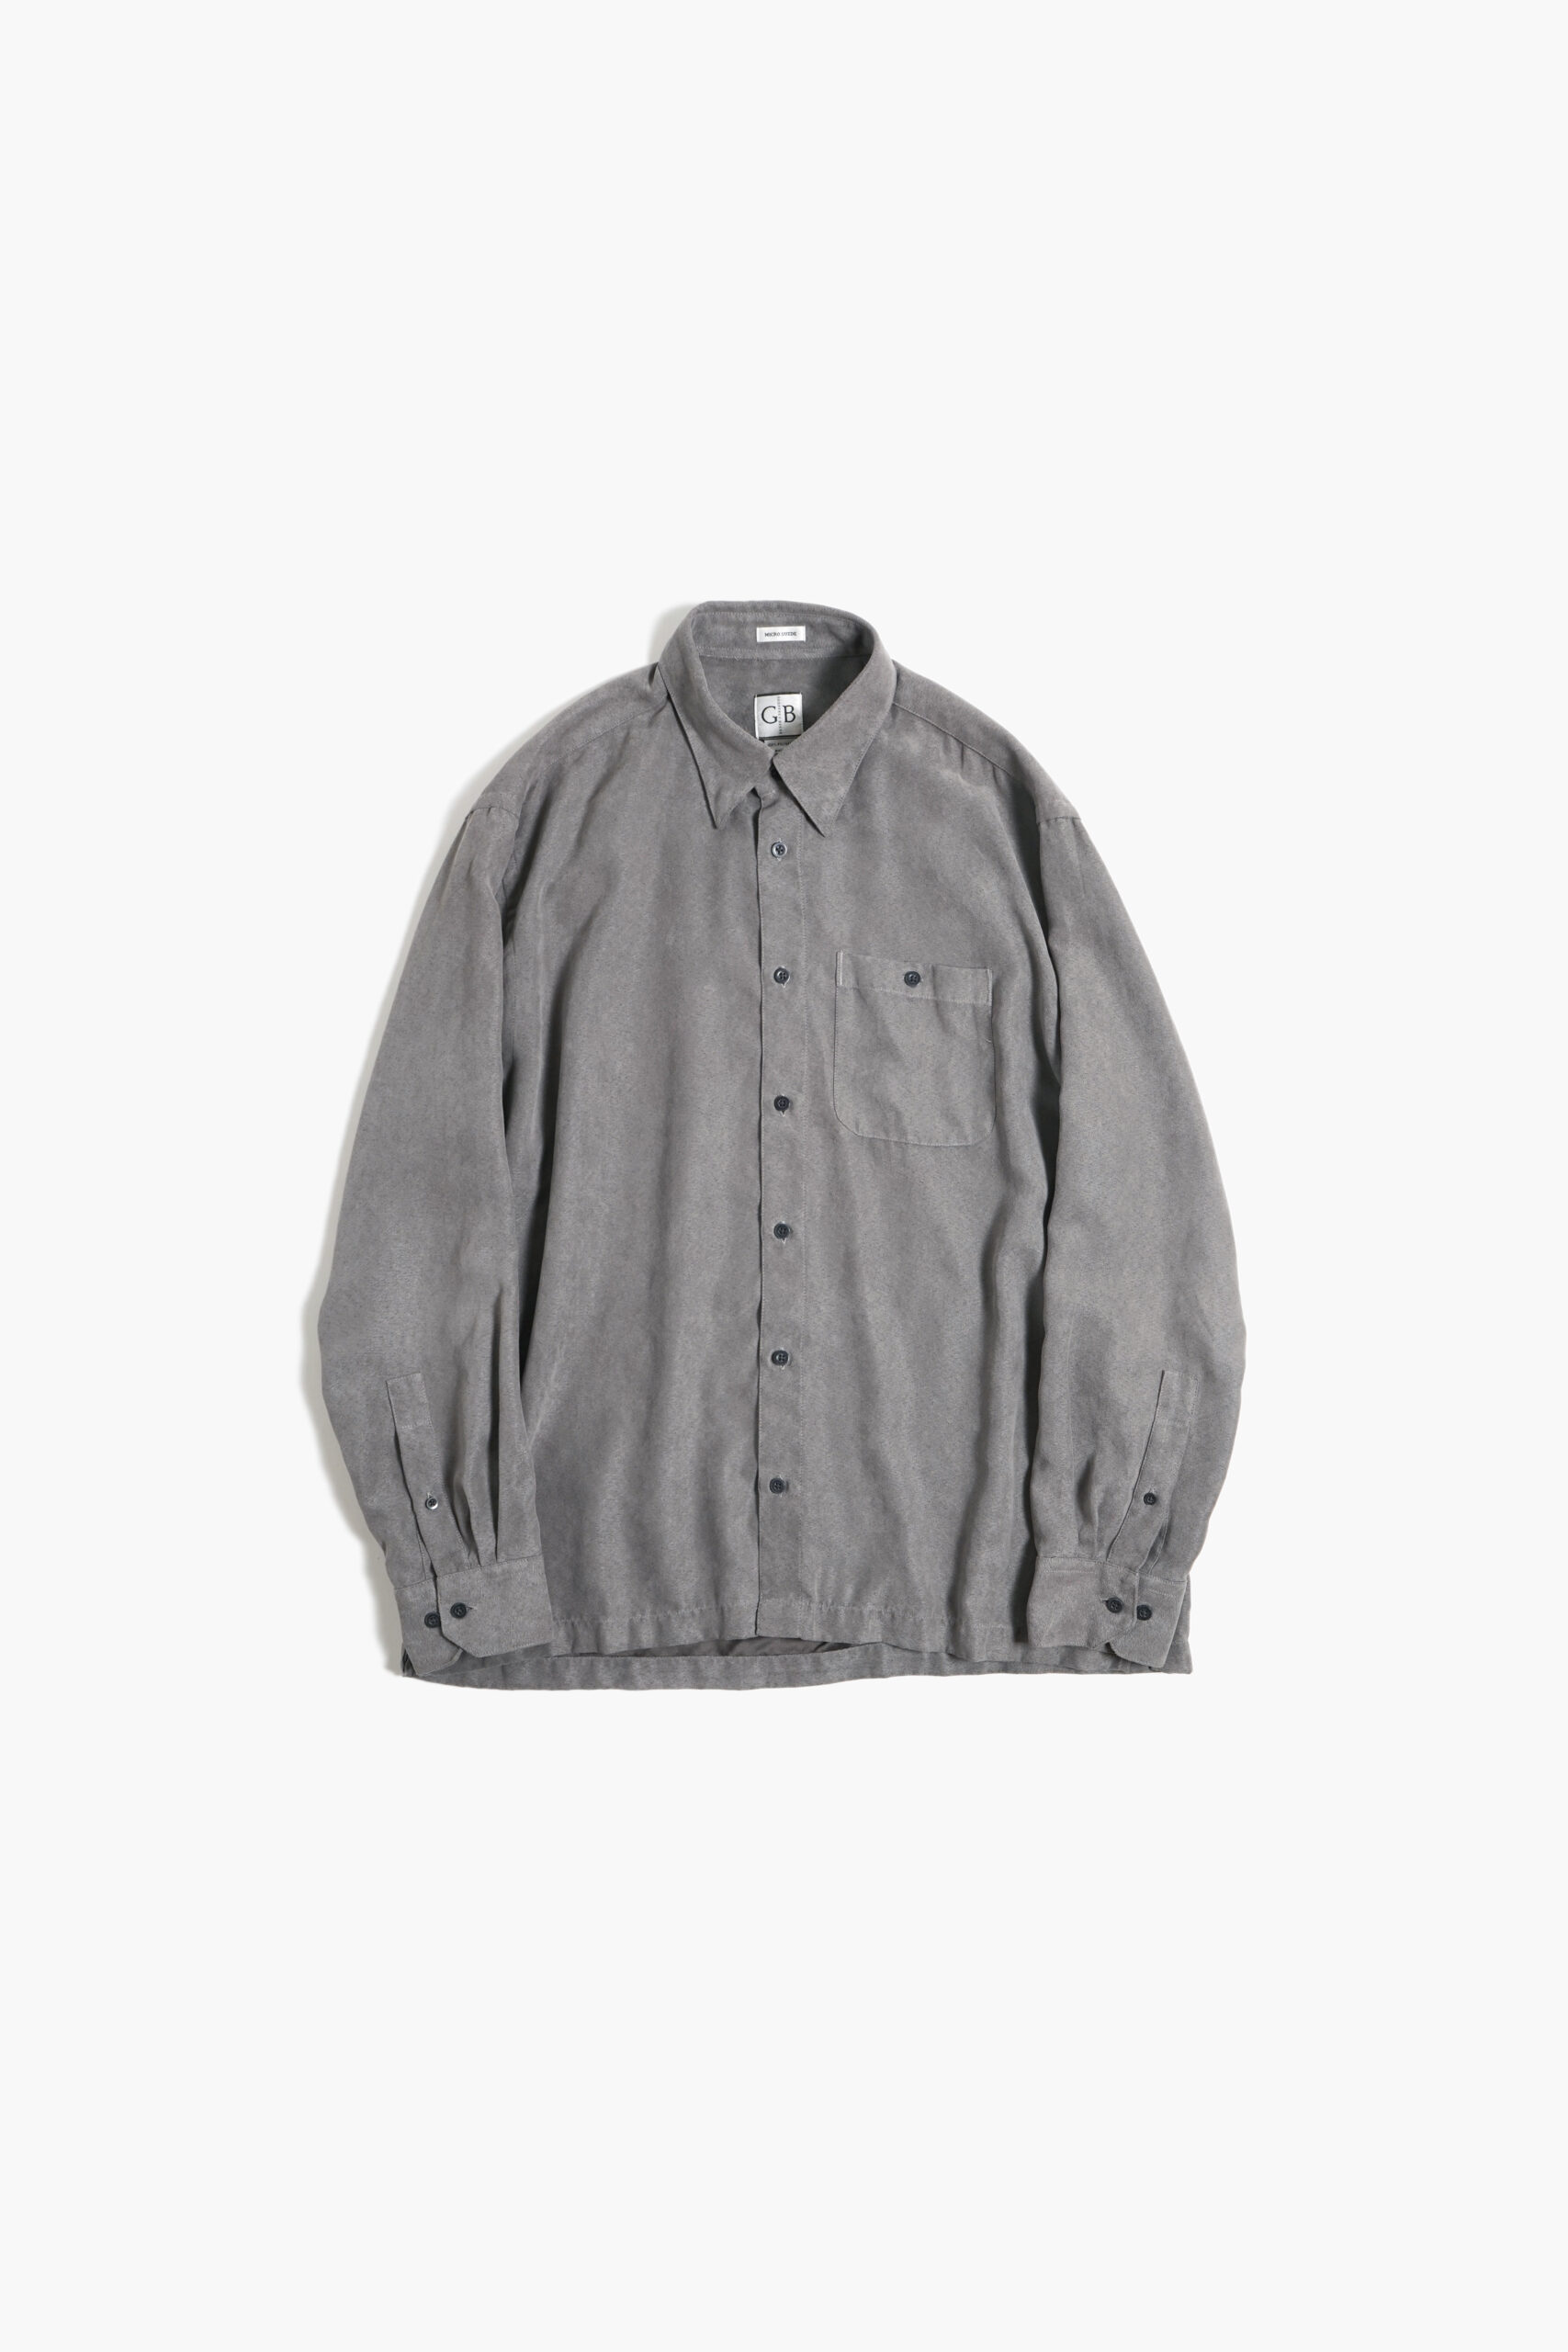 GB MICRO SUEDE L/S SHIRT GRAY